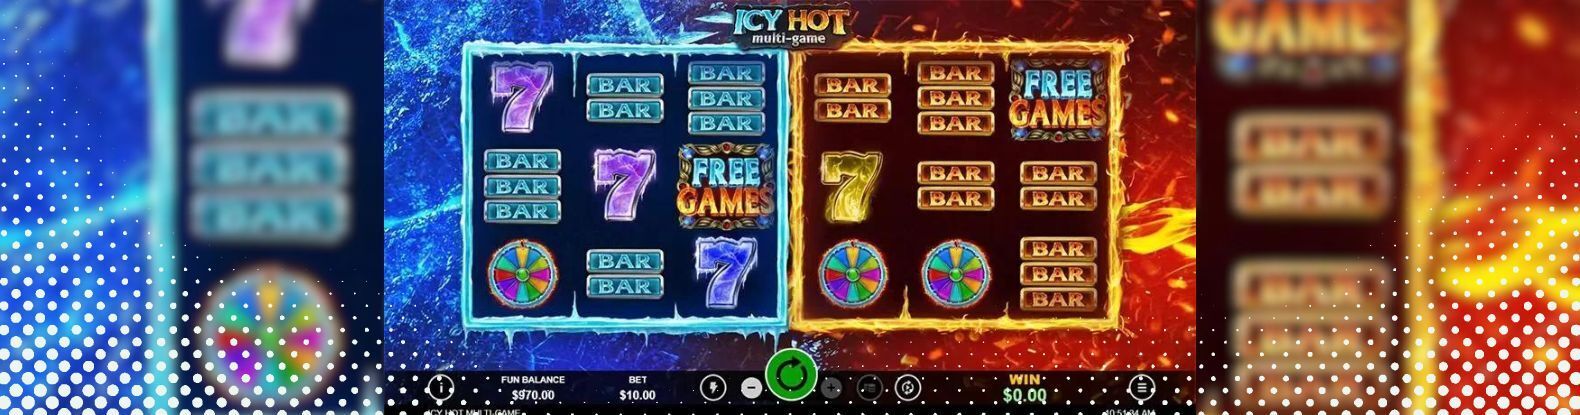 This is a pic of Icy Hot Multi-Game by RealTime Gaming